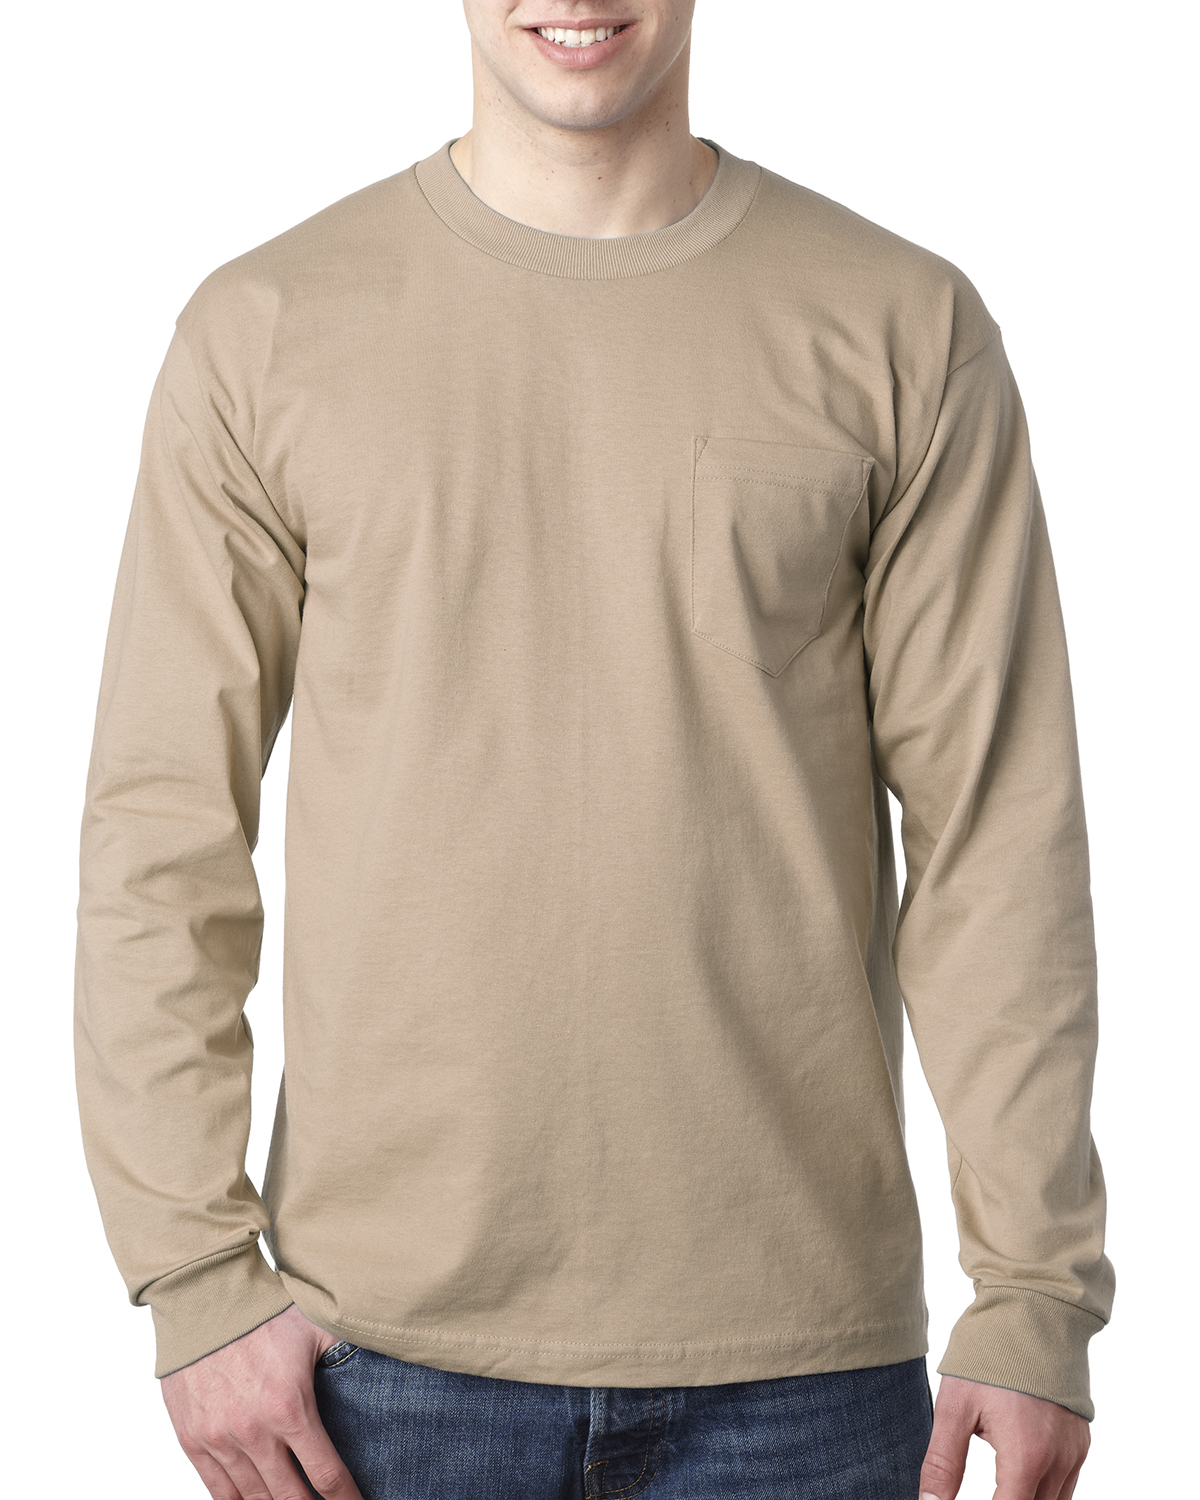 Bayside Apparel USA-Made Long Sleeve T-Shirt with a Pocket XL/Lime Green 